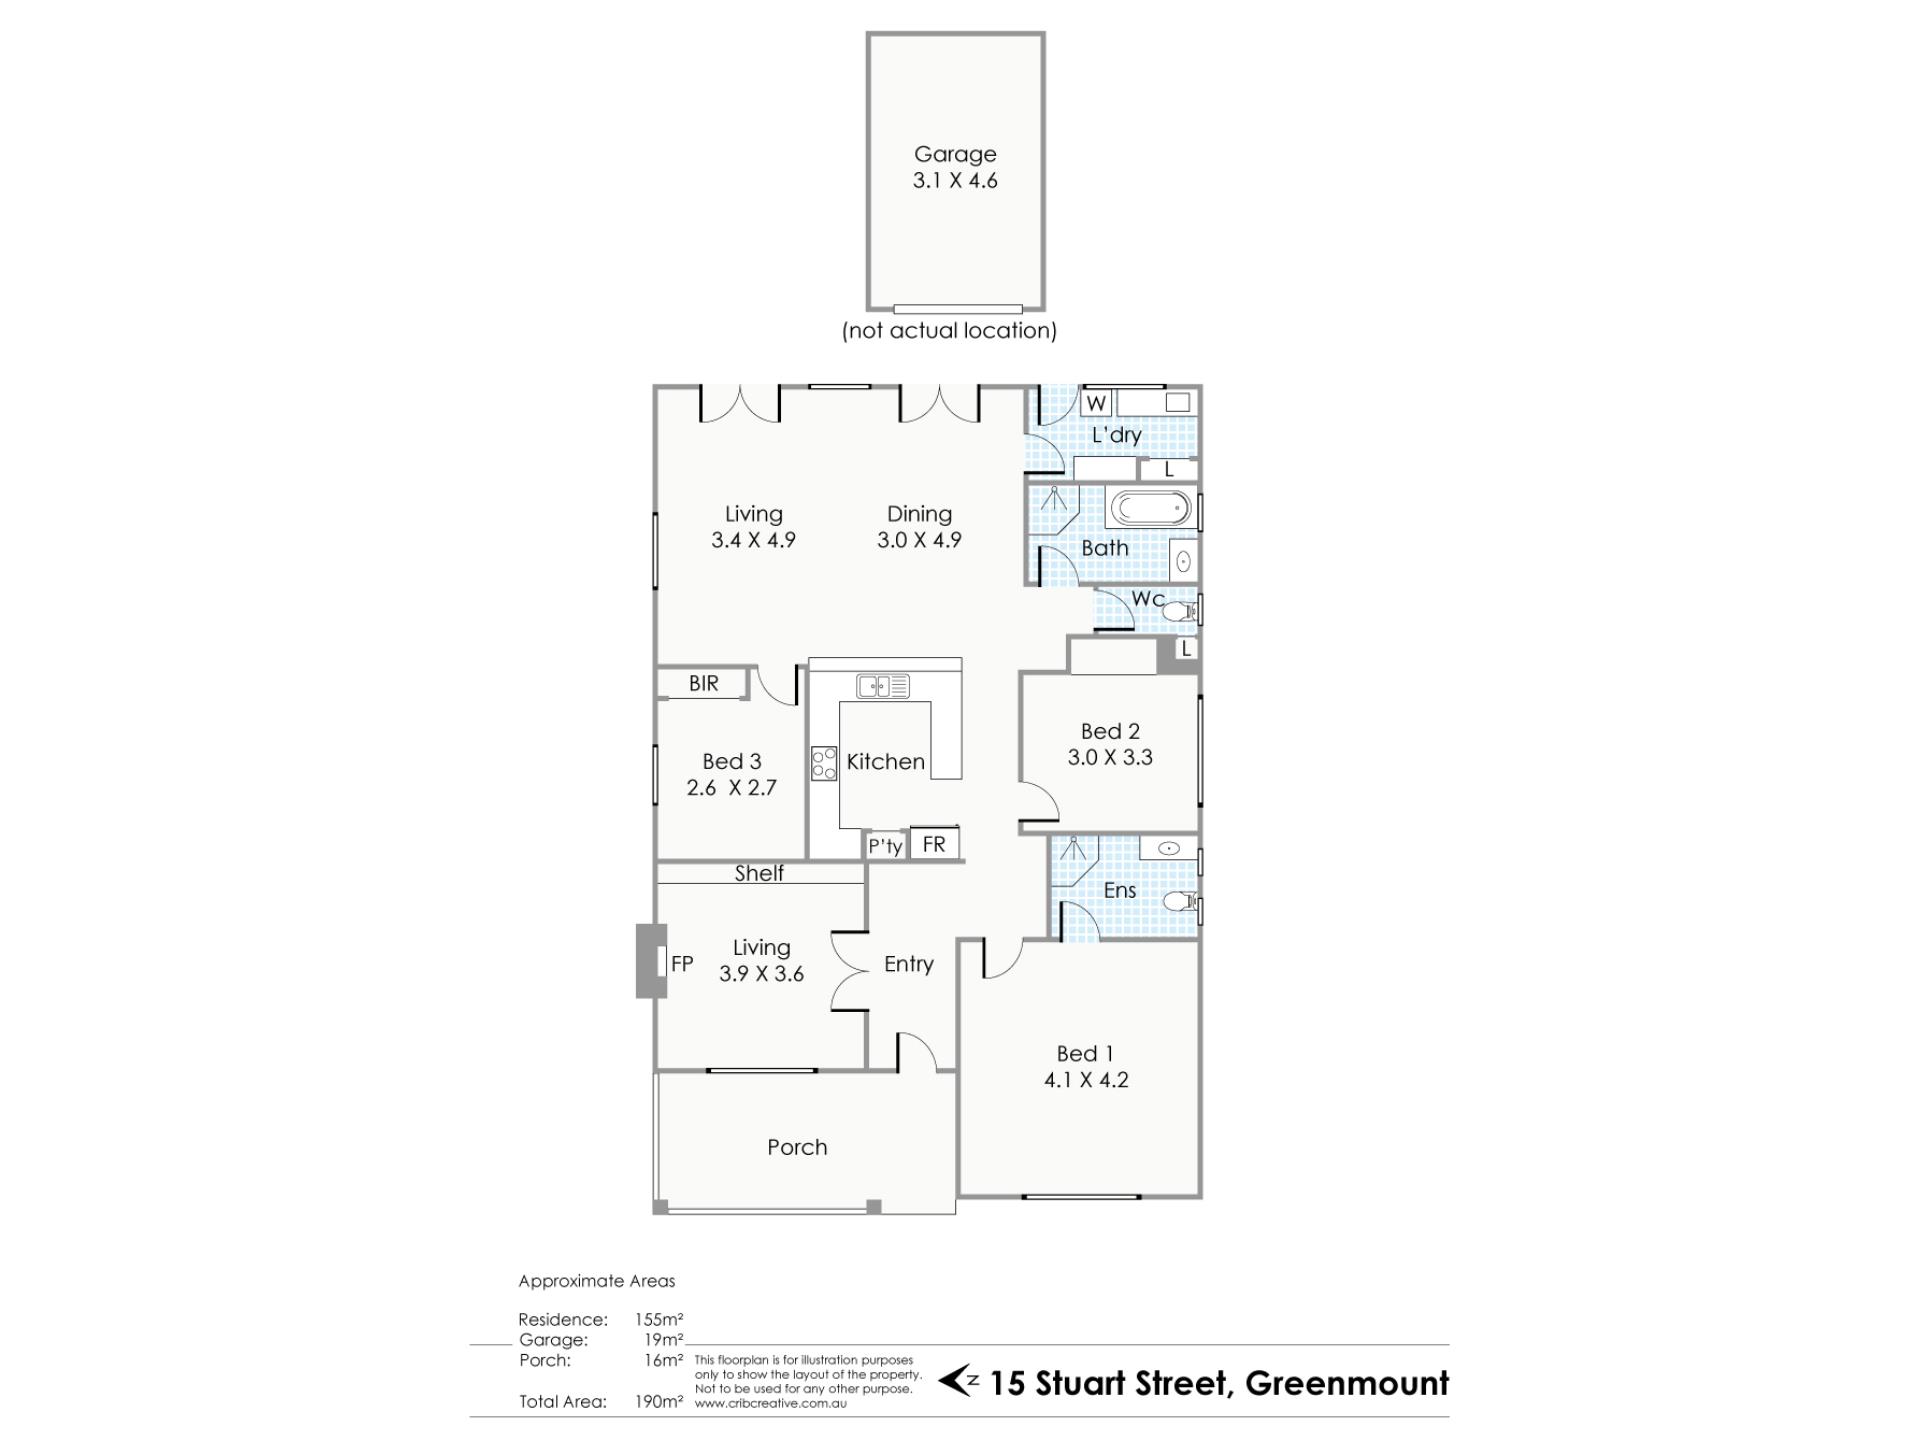 Property for sale in Greenmount : Earnshaws Real Estate